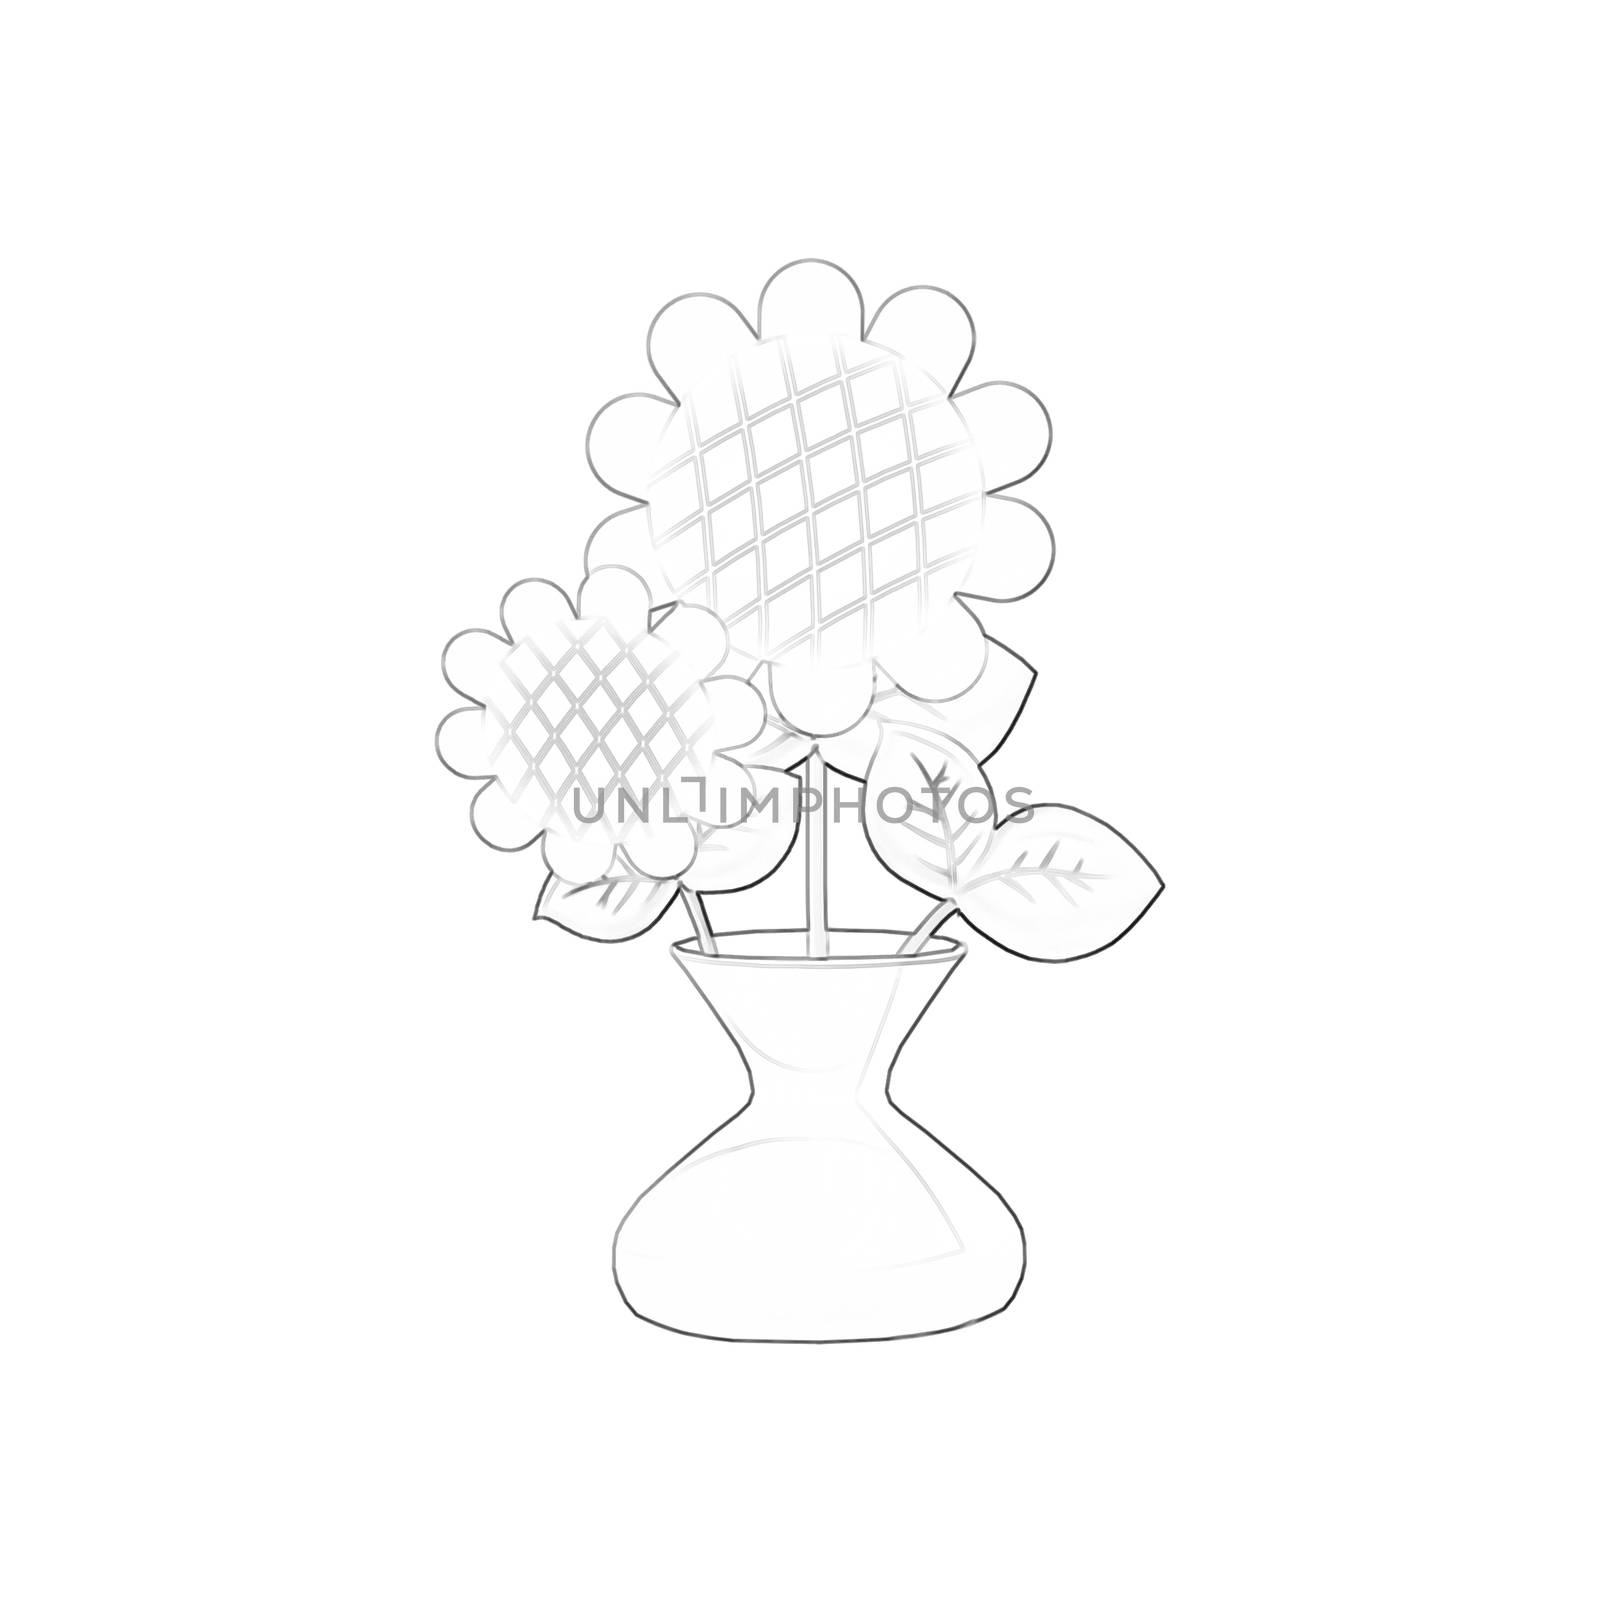 Illustration: Coloring Book Series: Vase of Flowers. Soft line. Print it and bring it to Life with Color! Fantastic Outline / Sketch / Line Art Design.